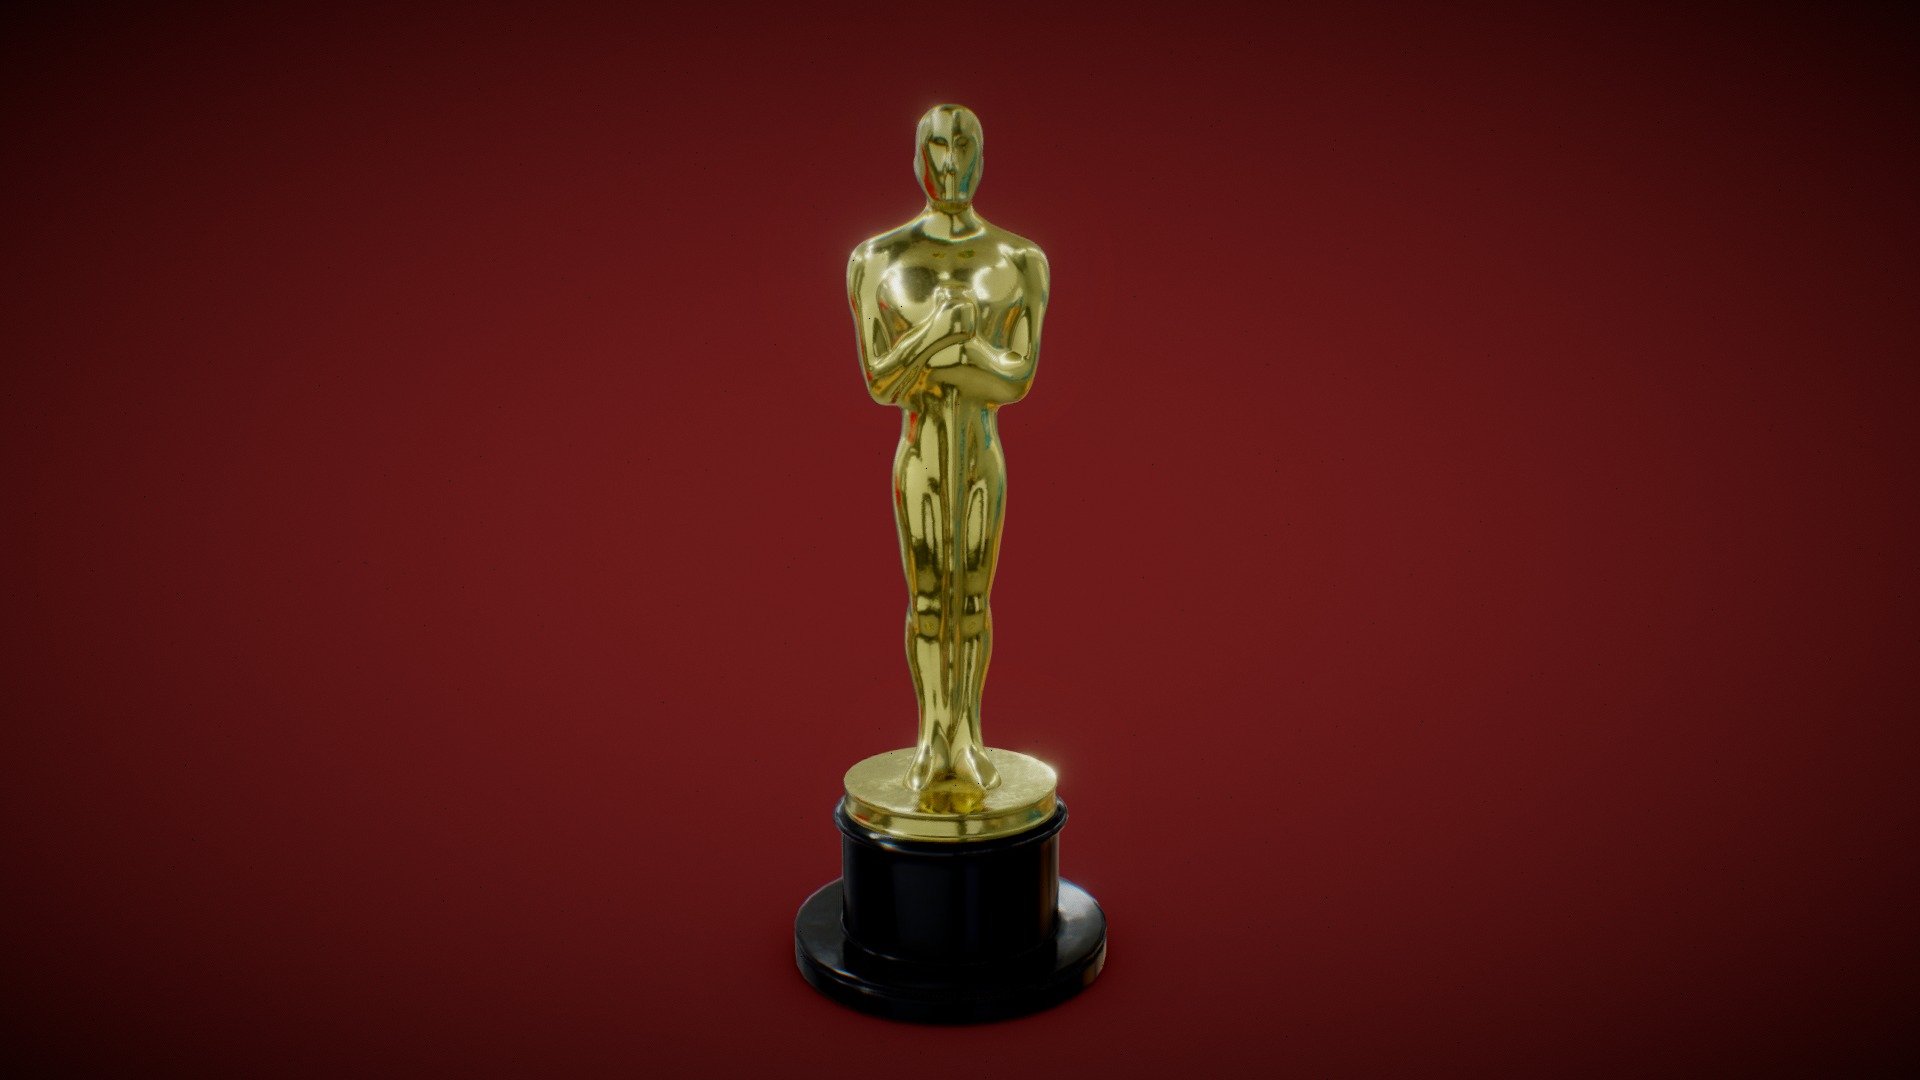 An Accurate Model of The Oscar Award Trophy statuette

High poly sculpt,3D Printing STL file version is included in the Additional files 
High Quality 4K PBR textures 
Perfect for both real-time and pre-rendered applications

Feel free to contact me if you have any questions, hope you like it :) - The Academy Awards Oscar Statuette Trophy - Buy Royalty Free 3D model by Deftroy 3d model